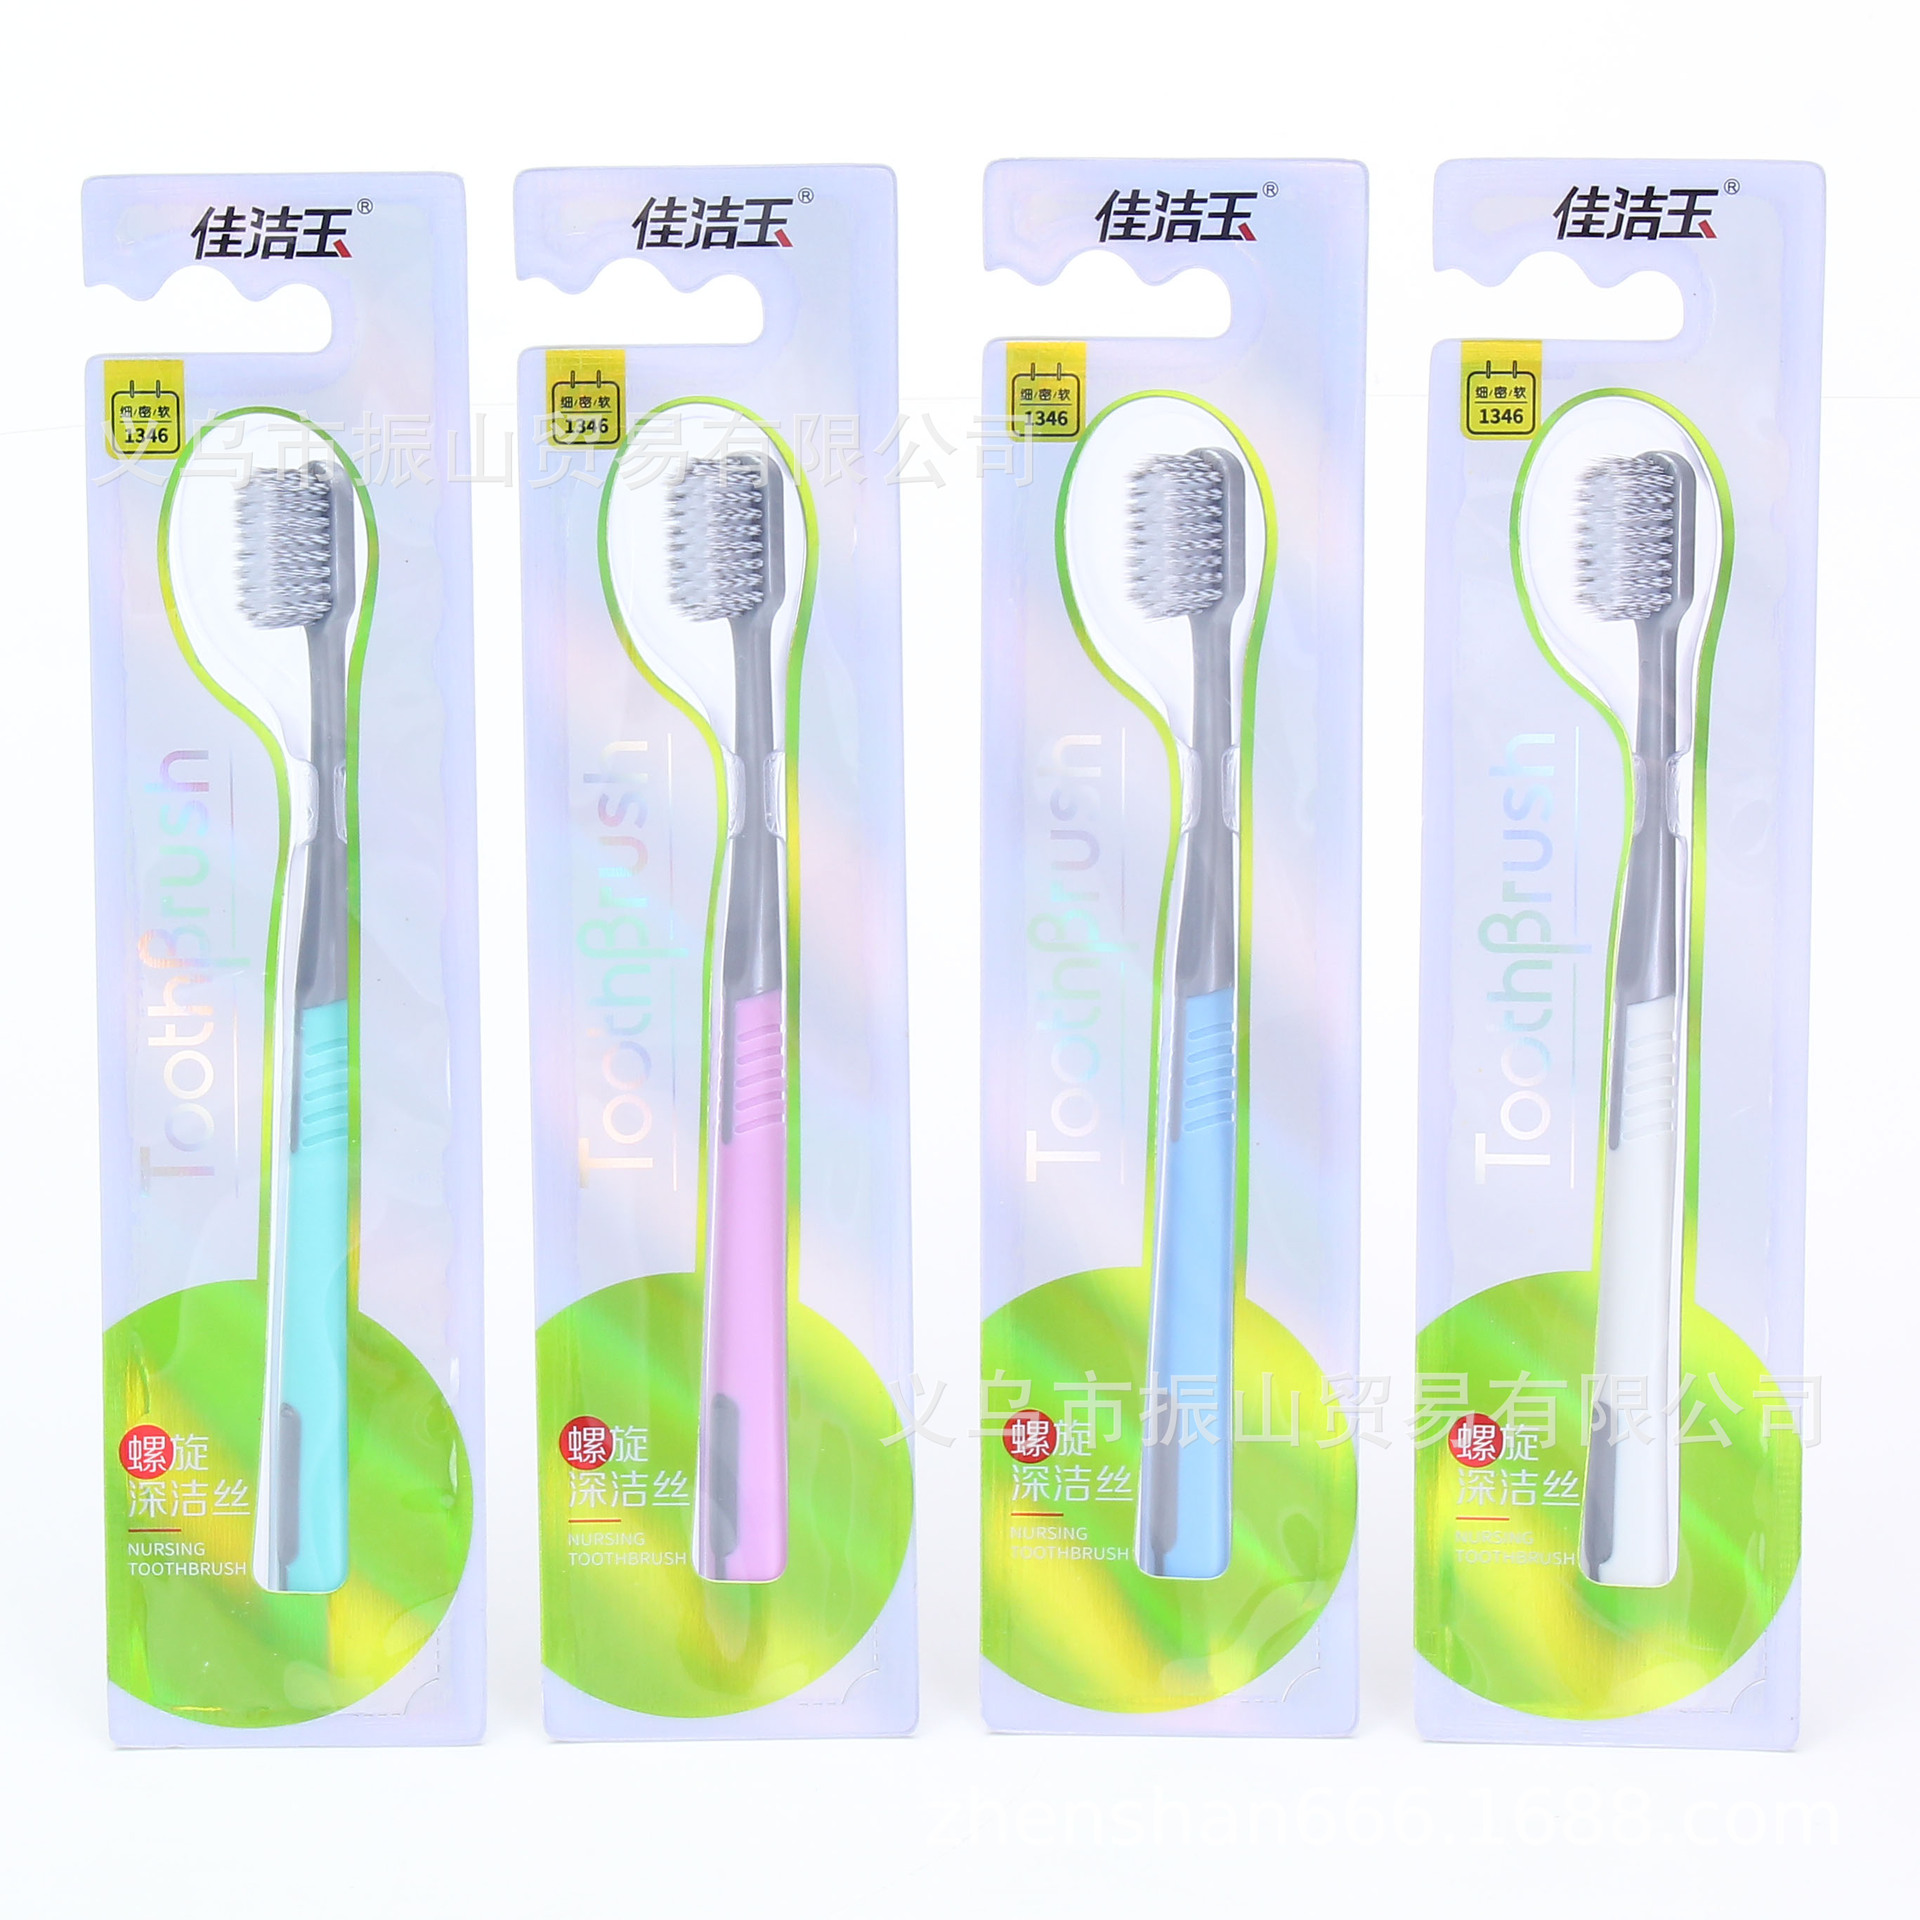 Jiajie Jade 1346 Fine， Dense and Soft Three-Dimensional Double-Sided Blister Spiral Wire Hair Toothbrush